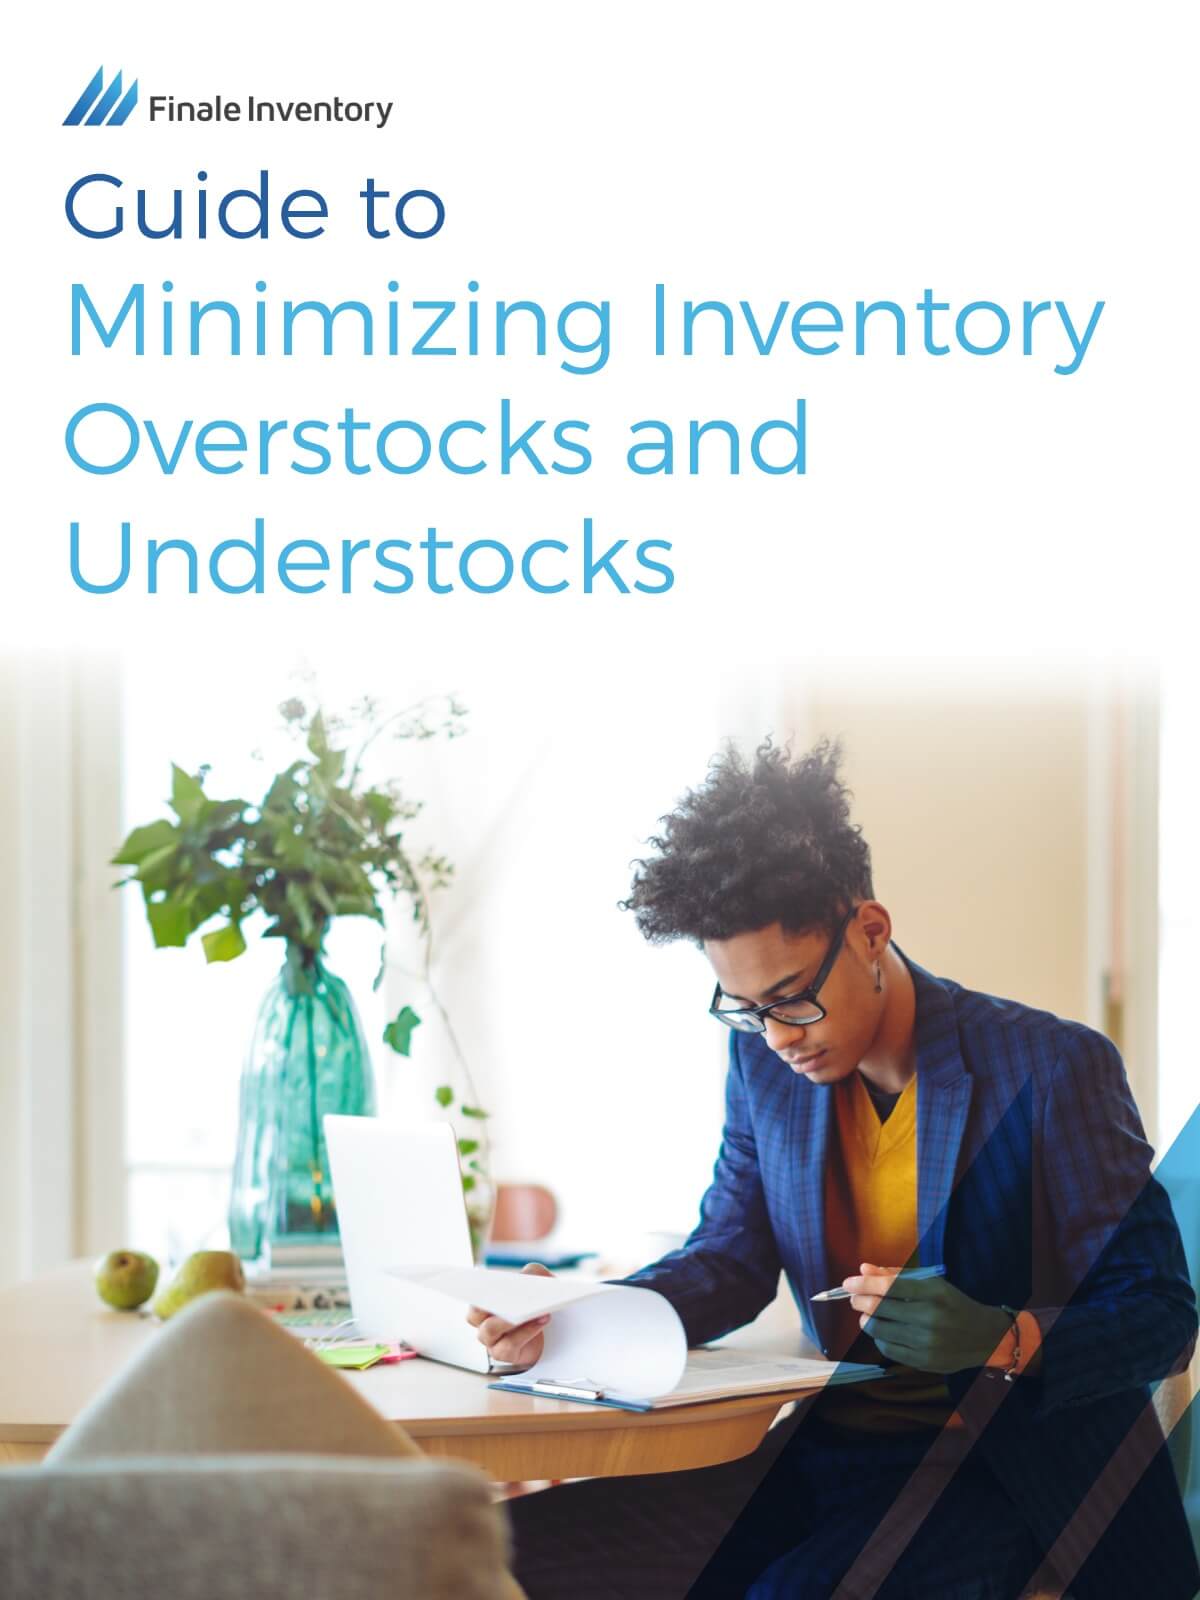 Guide to Minimizing Inventory Overstocks and Understocks